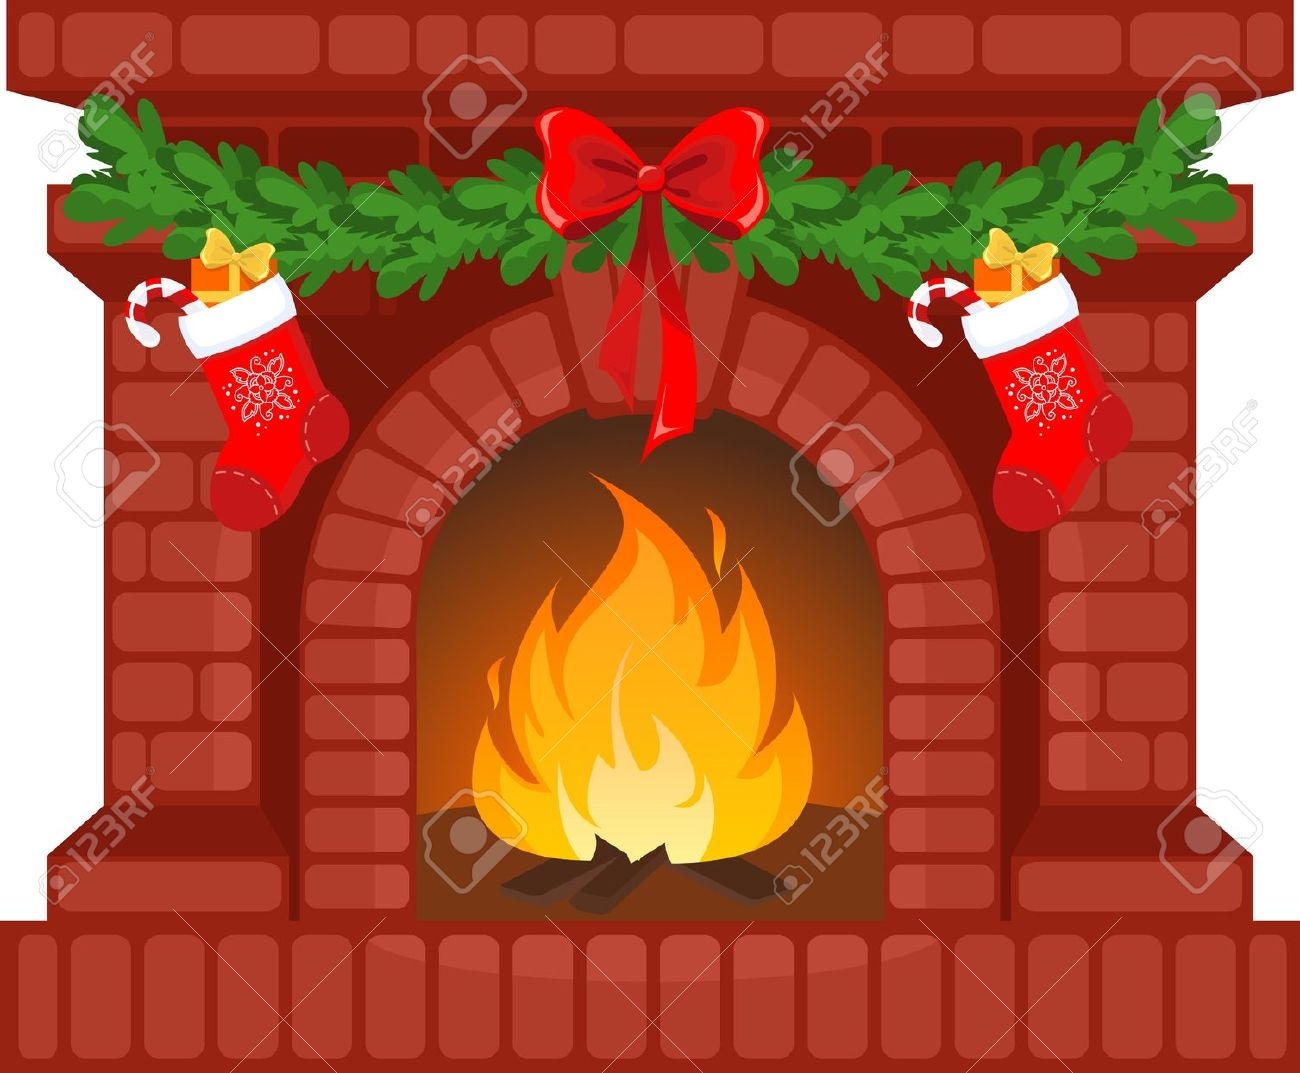 Fireplace clipart pictures idea